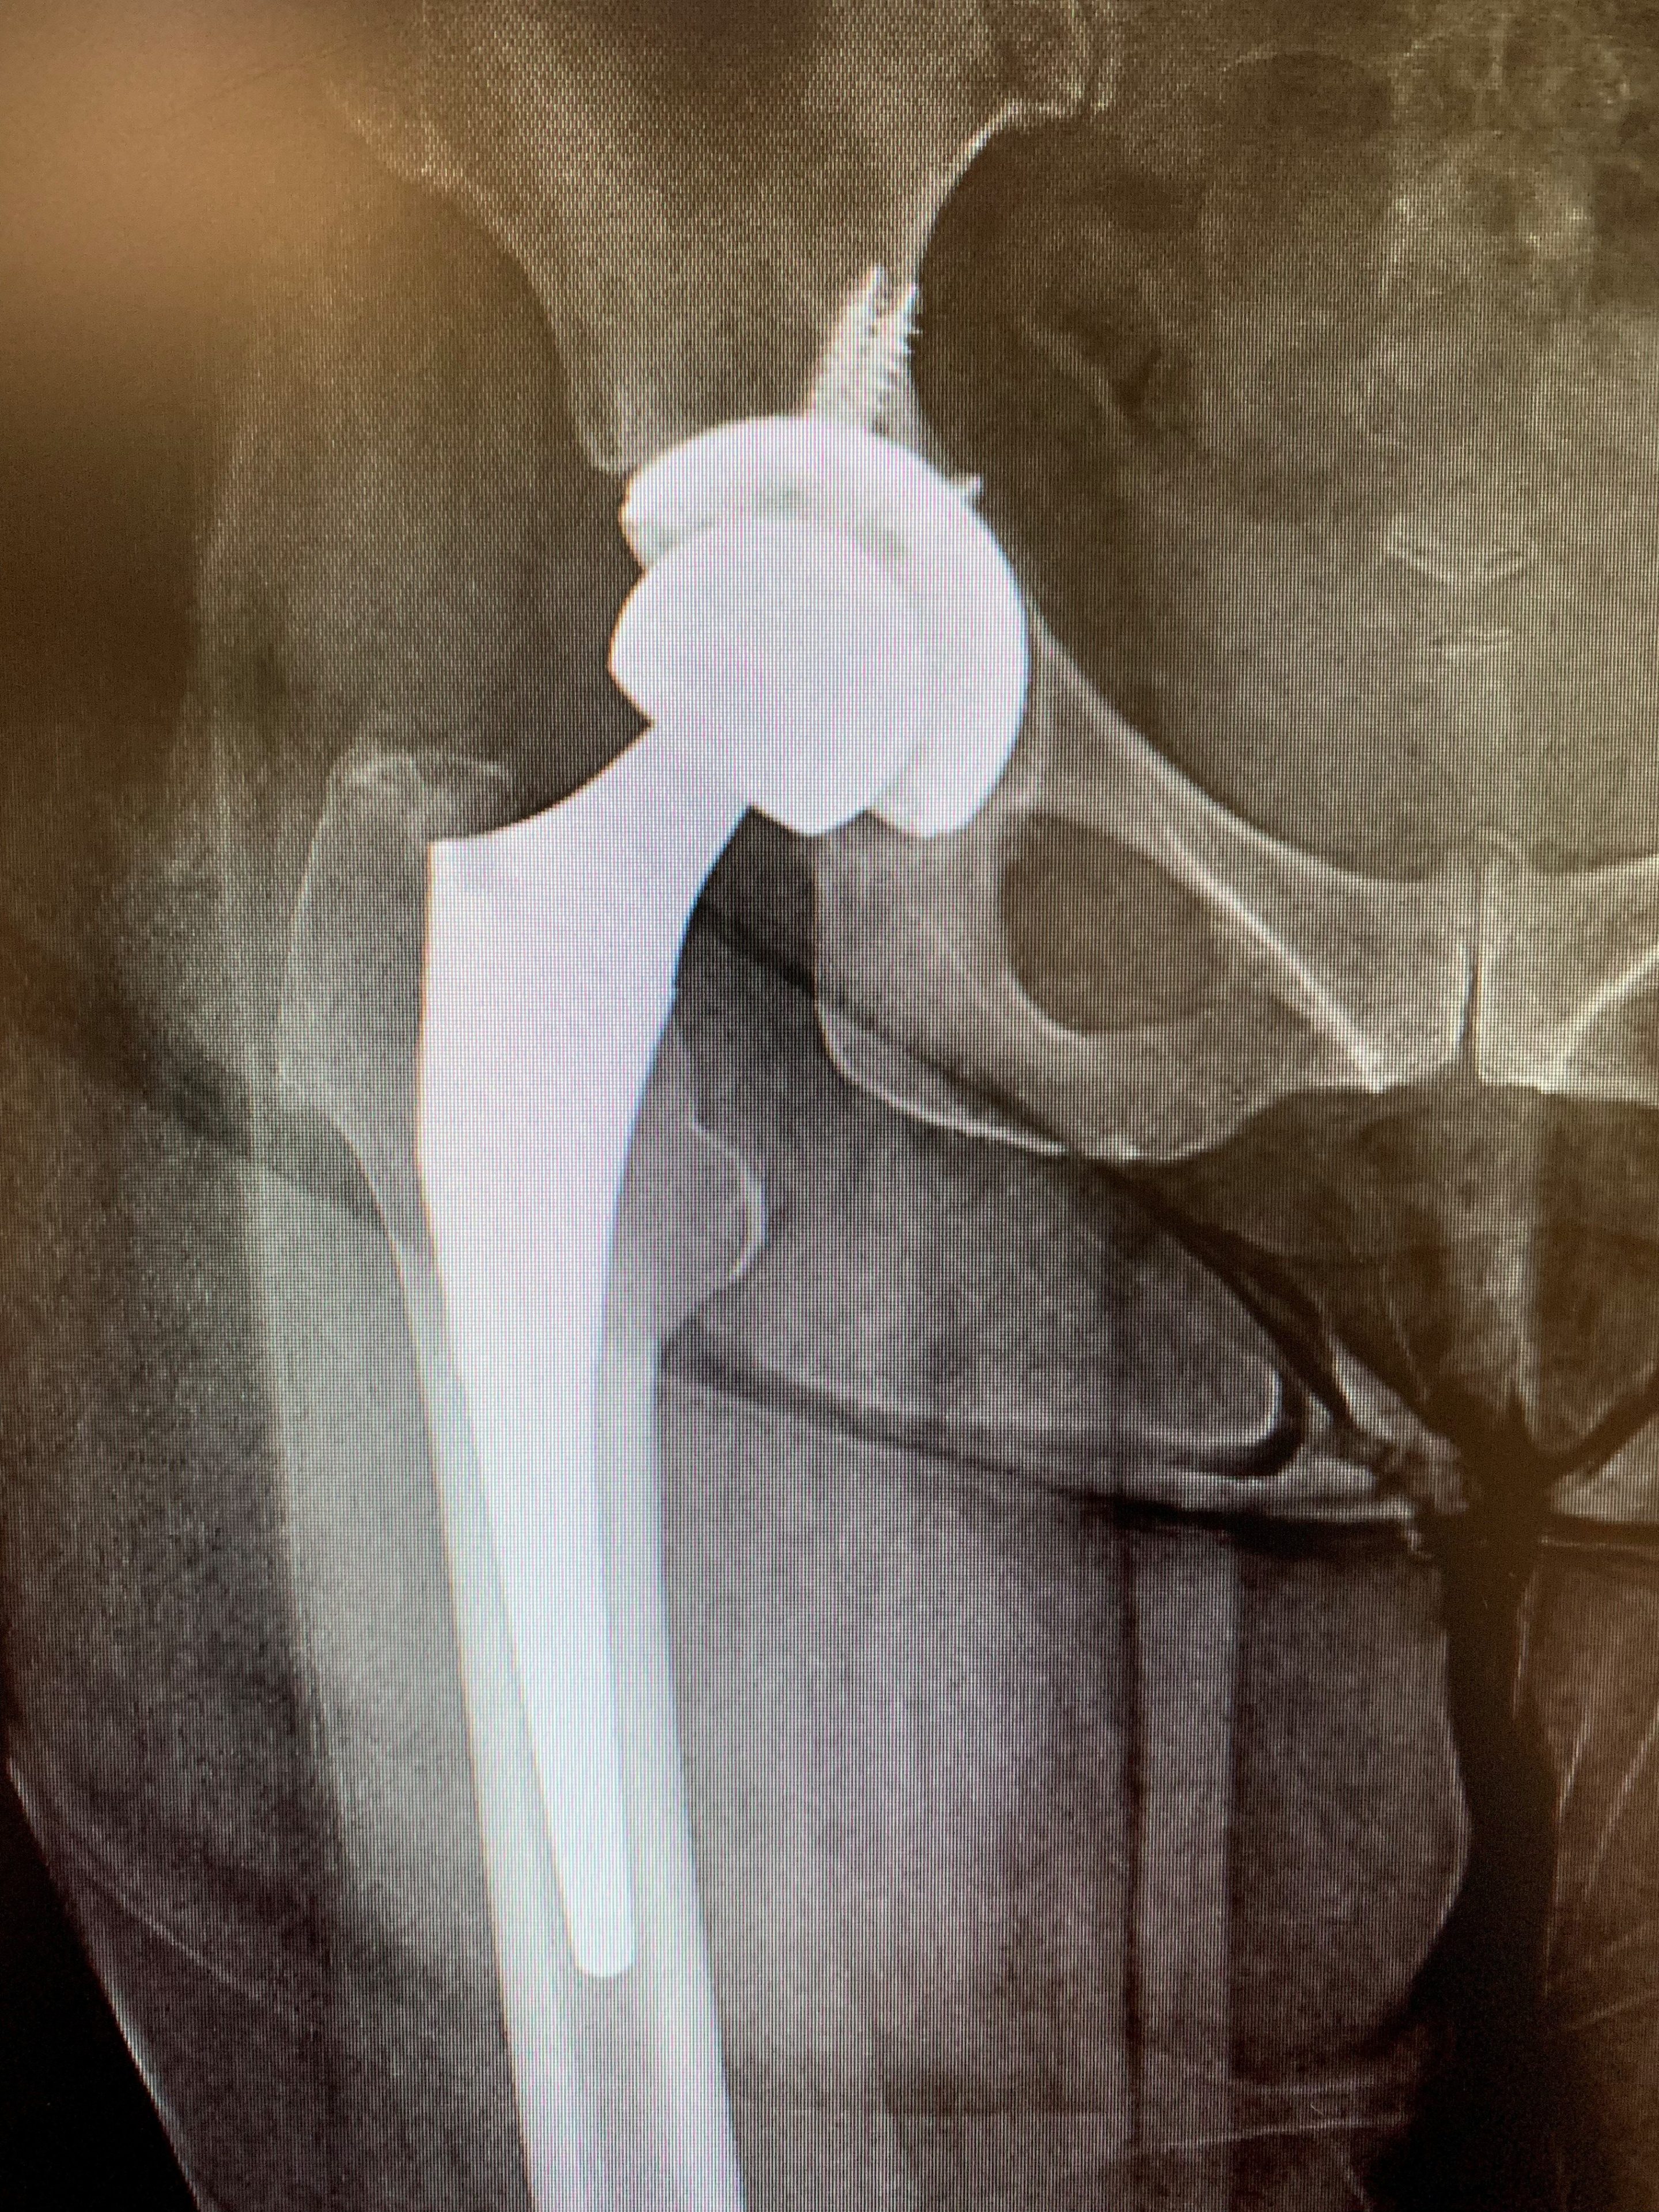 Revision Total Hip Replacement in a 64year old. Isolated acetabular component exchangeb